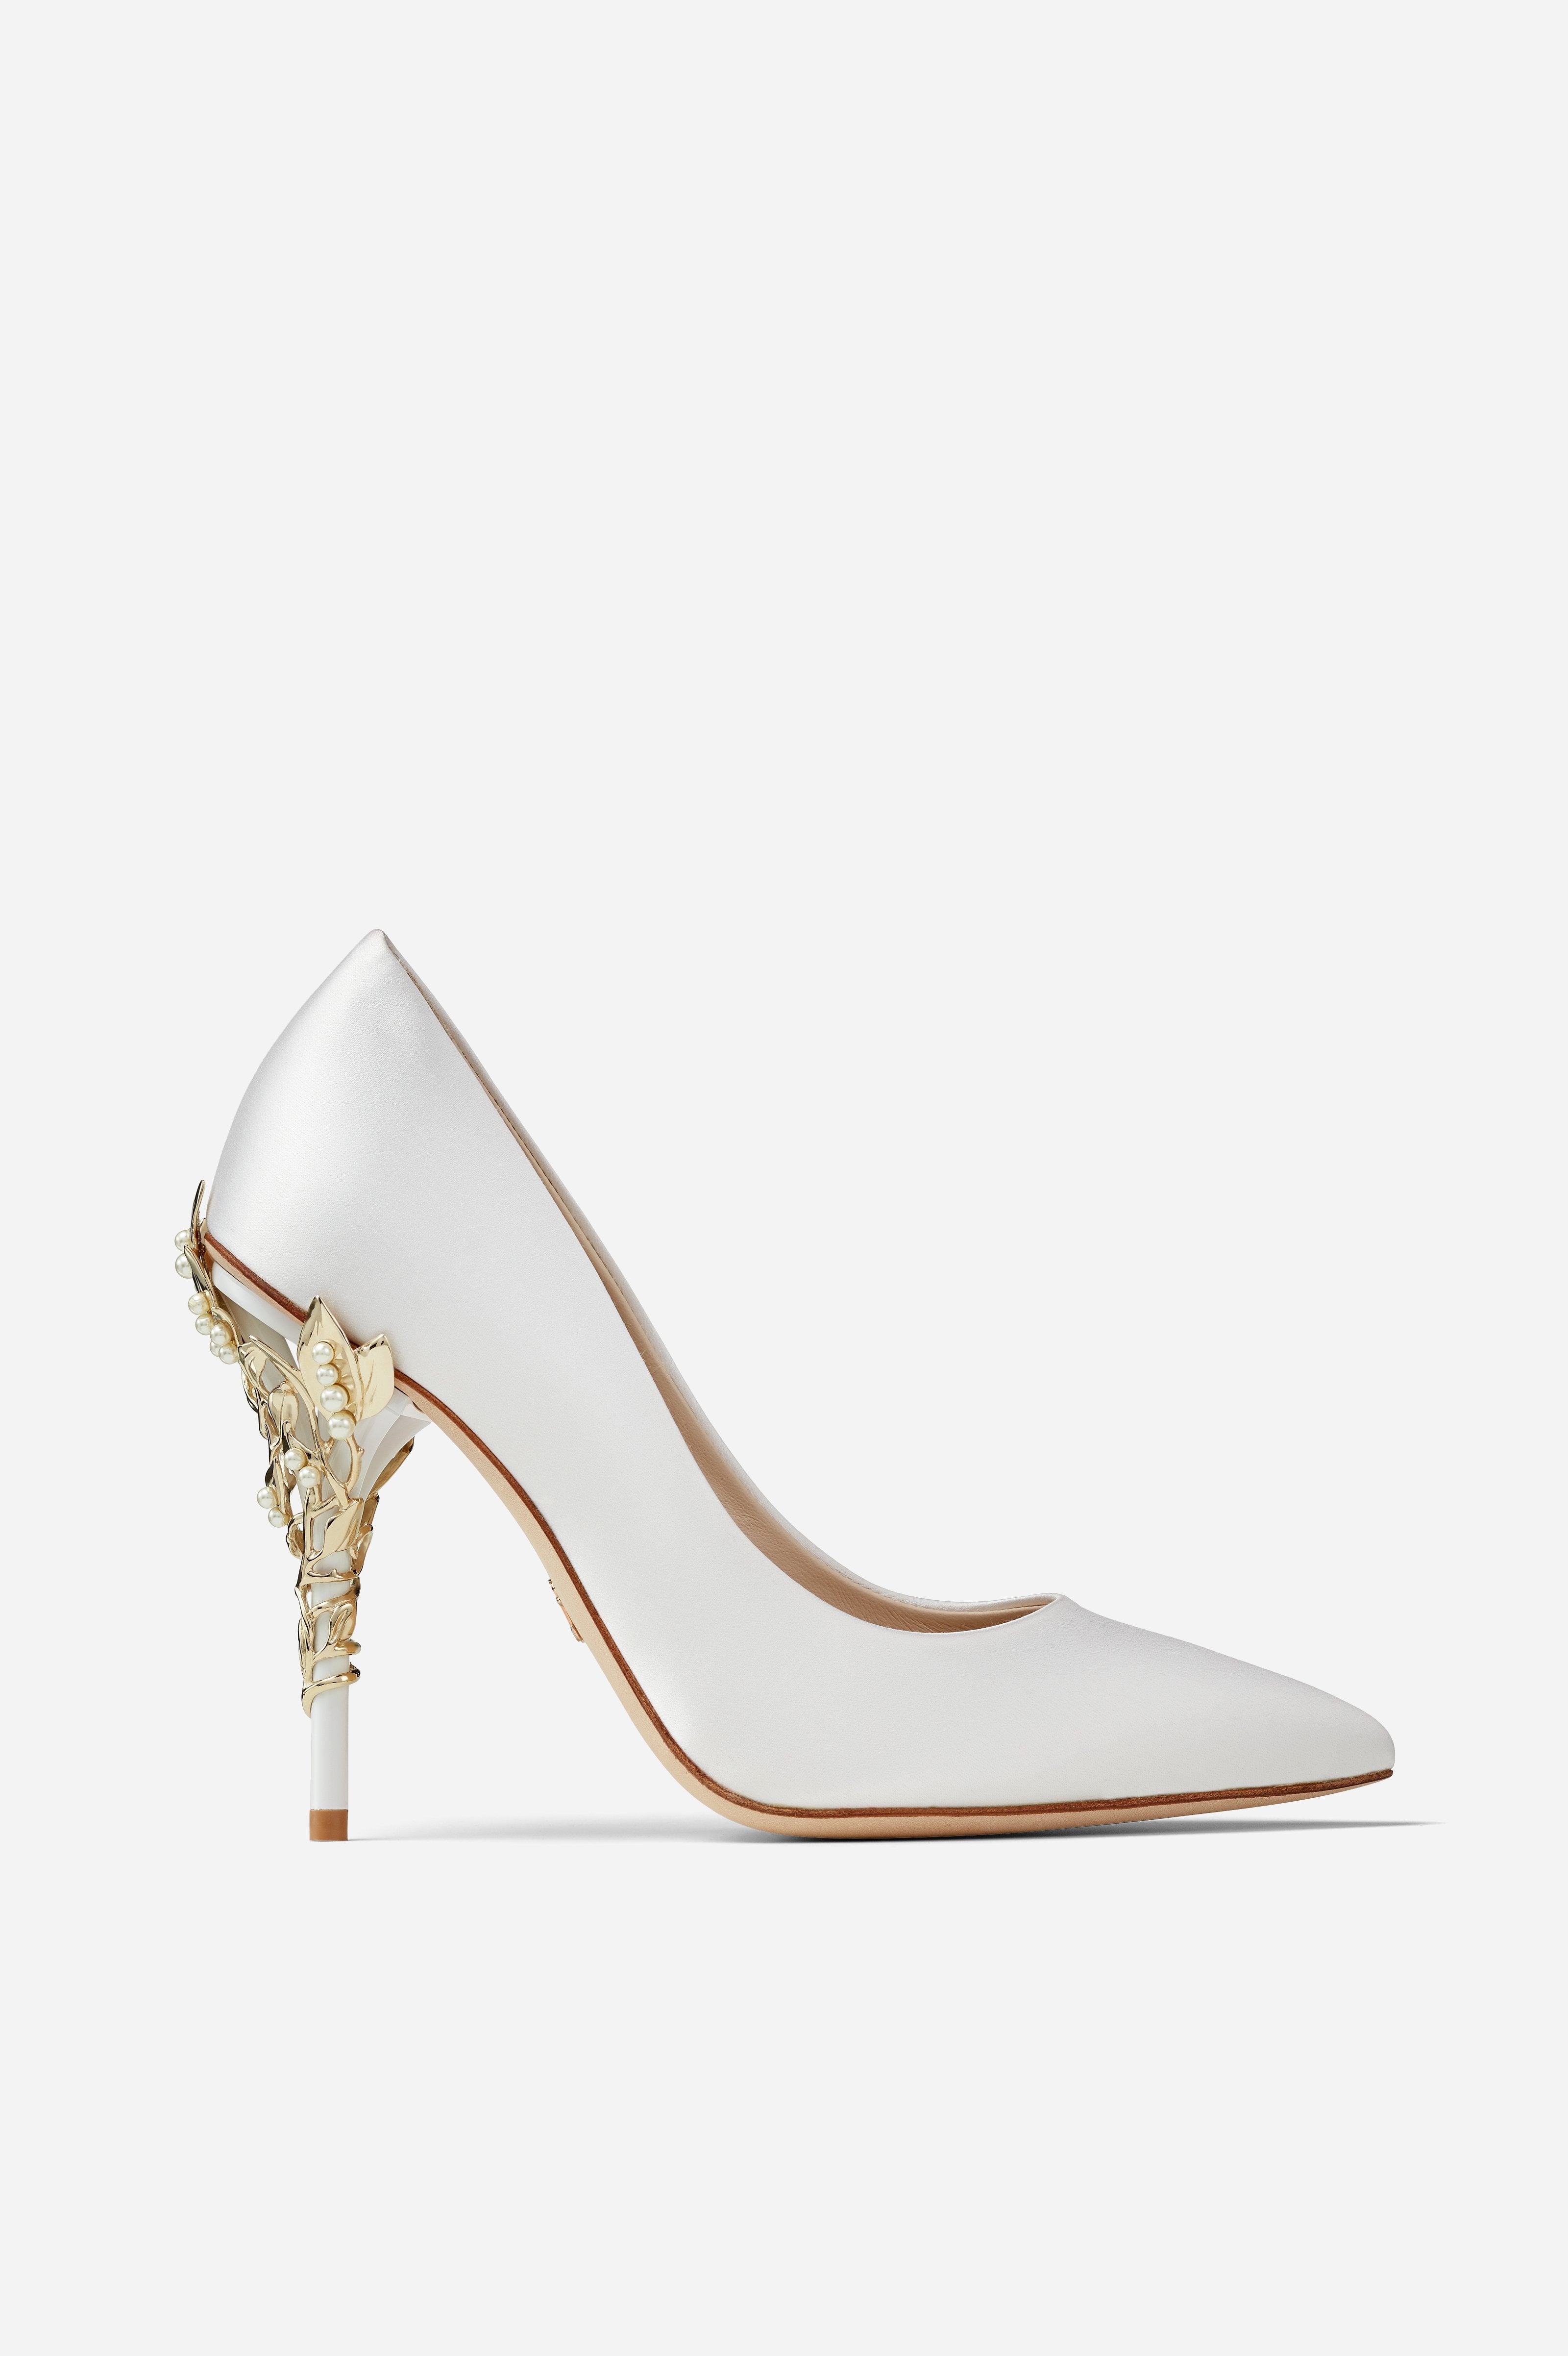 ralph and russo heels price